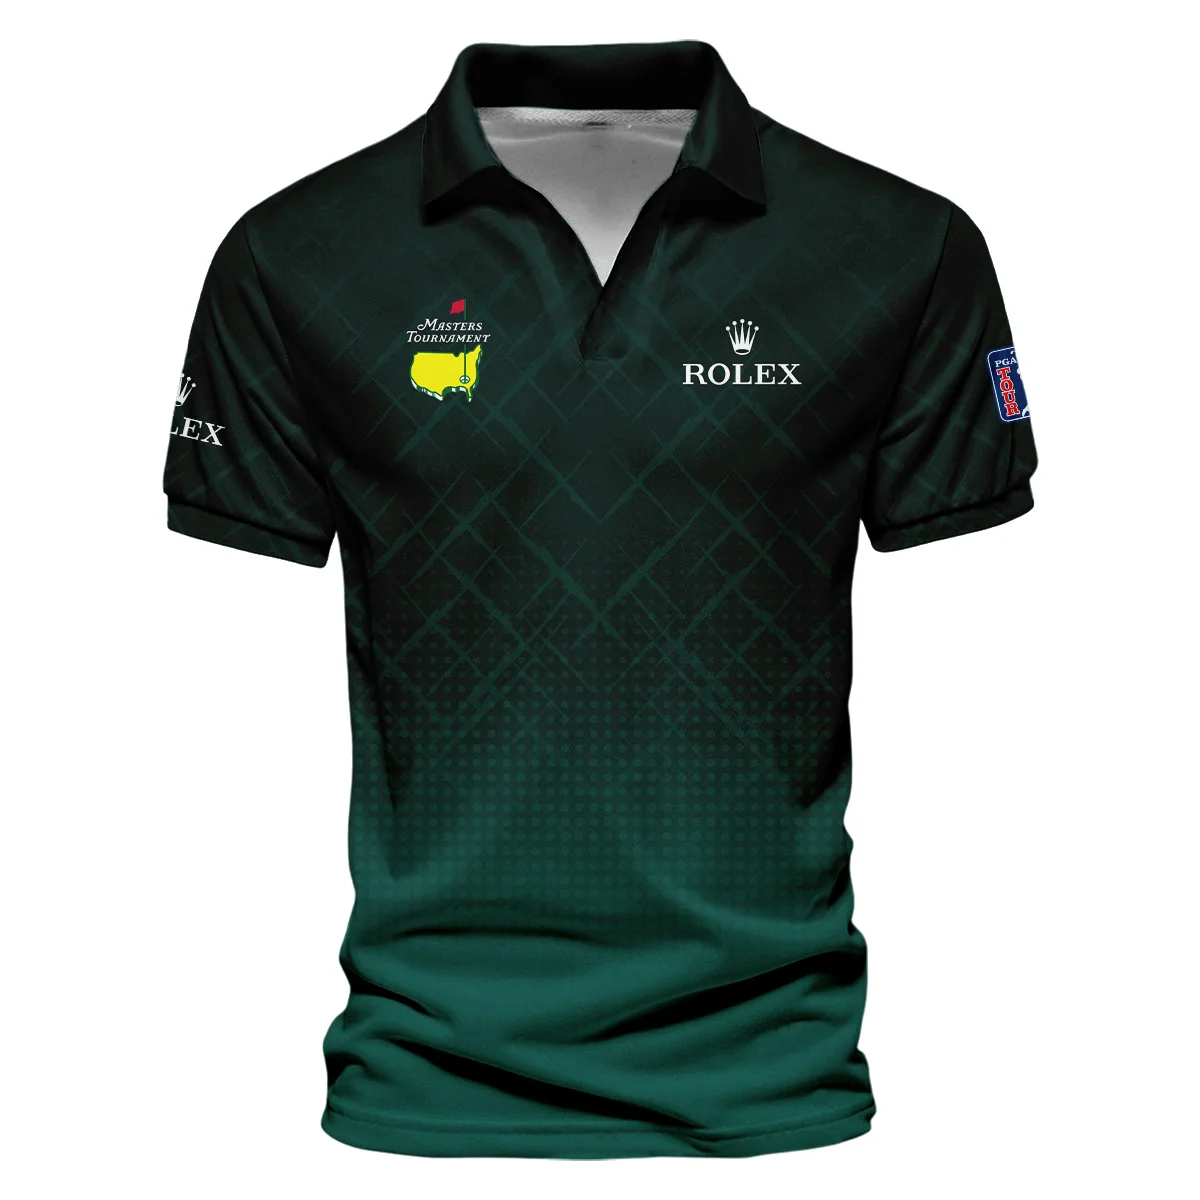 Rolex Masters Tournament Sport Jersey Pattern Dark Green Vneck Long Polo Shirt Style Classic Long Polo Shirt For Men